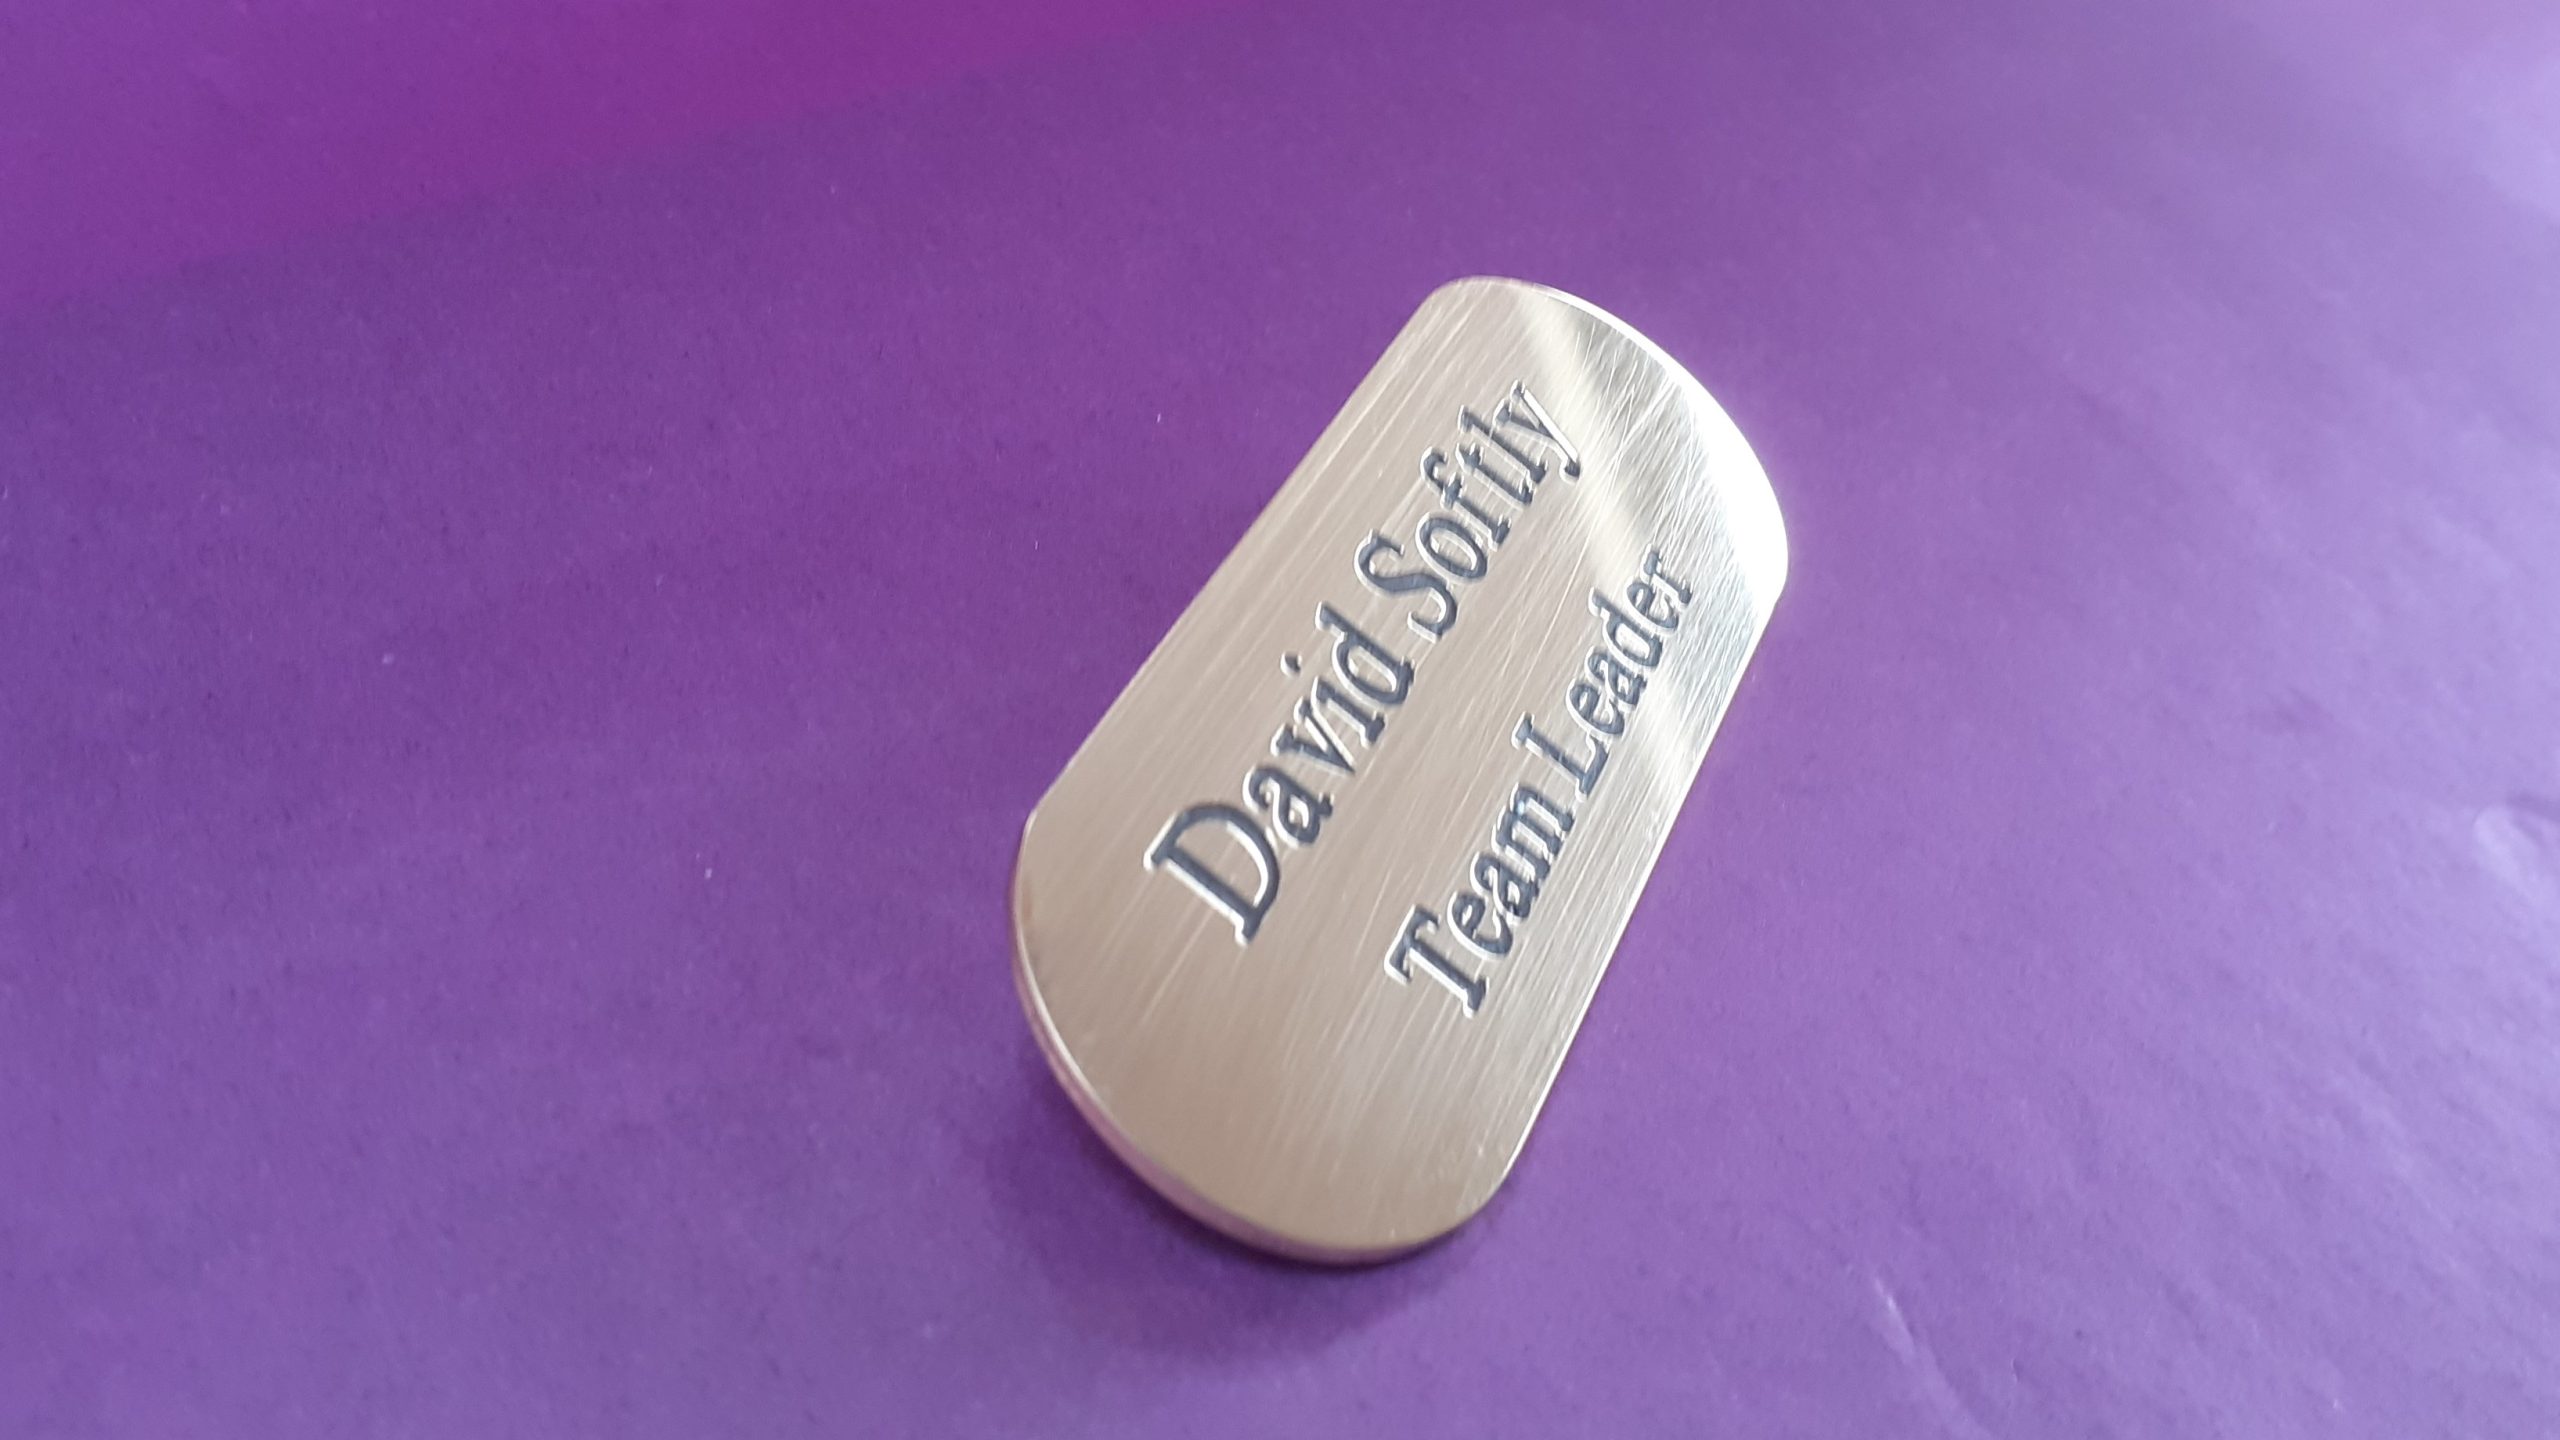 A distinctive, engraved brass badge resembling a pill, designed for durability and visual appeal